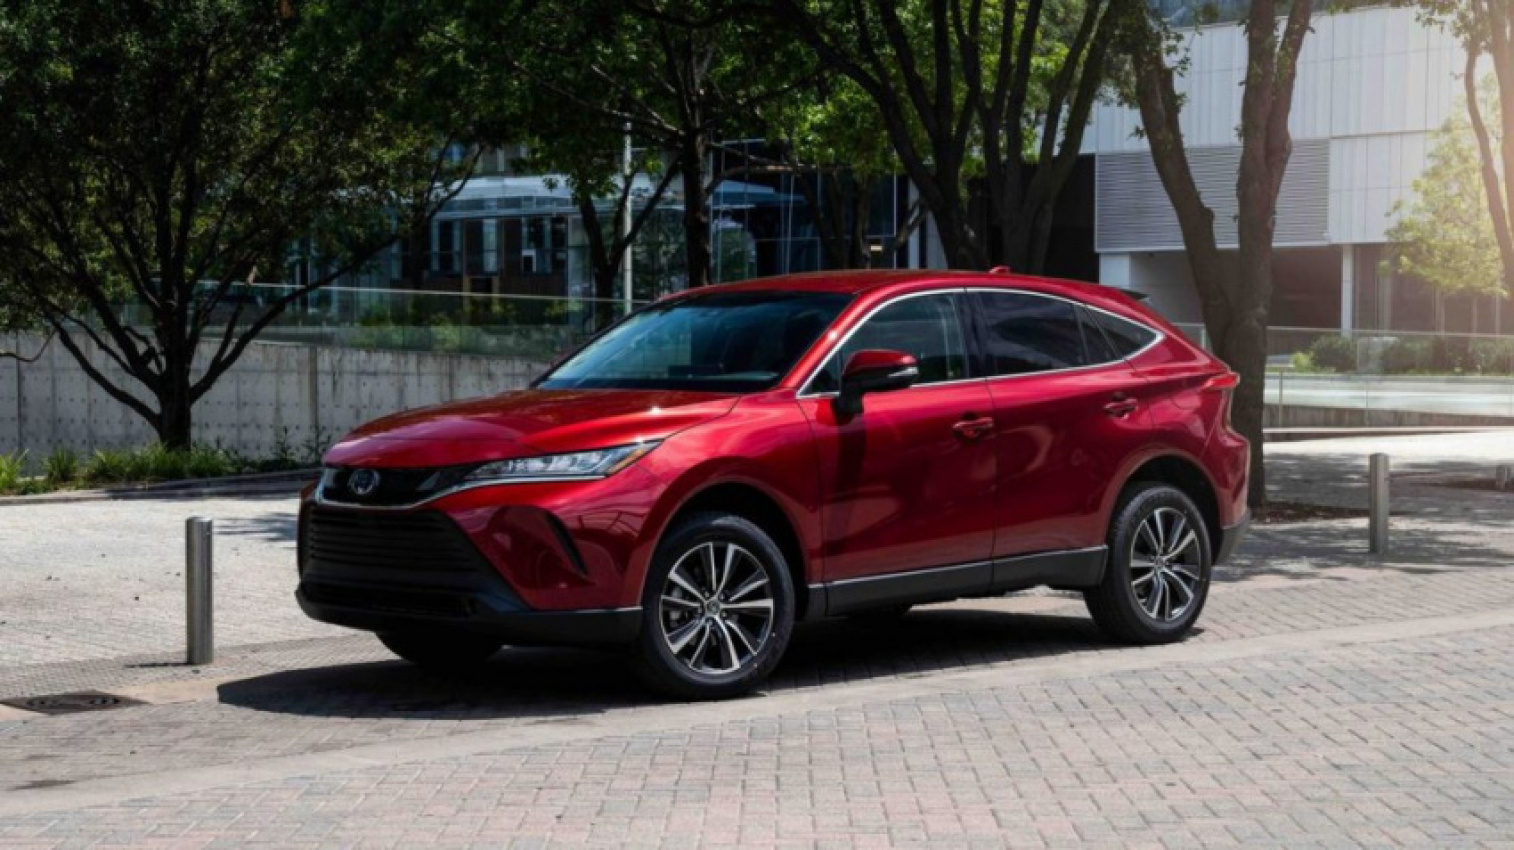 autos, cars, nissan, toyota, crossovers, nissan murano, toyota venza, toyota venza or nissan murano, which is the best suv for $33,000?